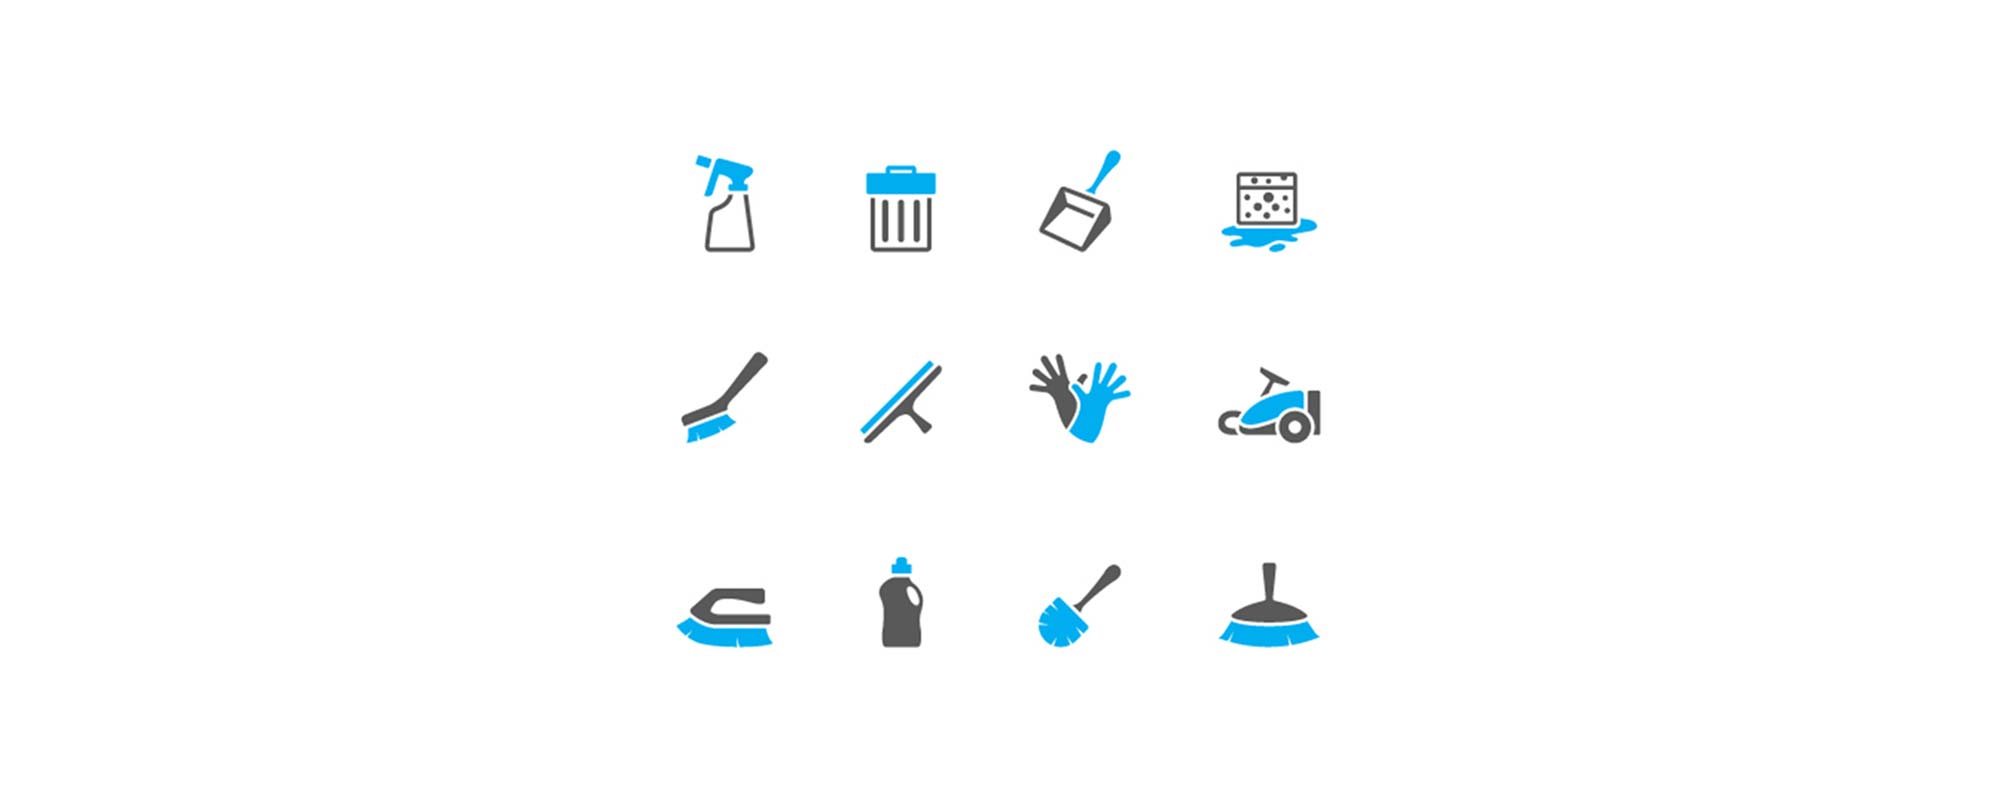 Cleaning tool icon 